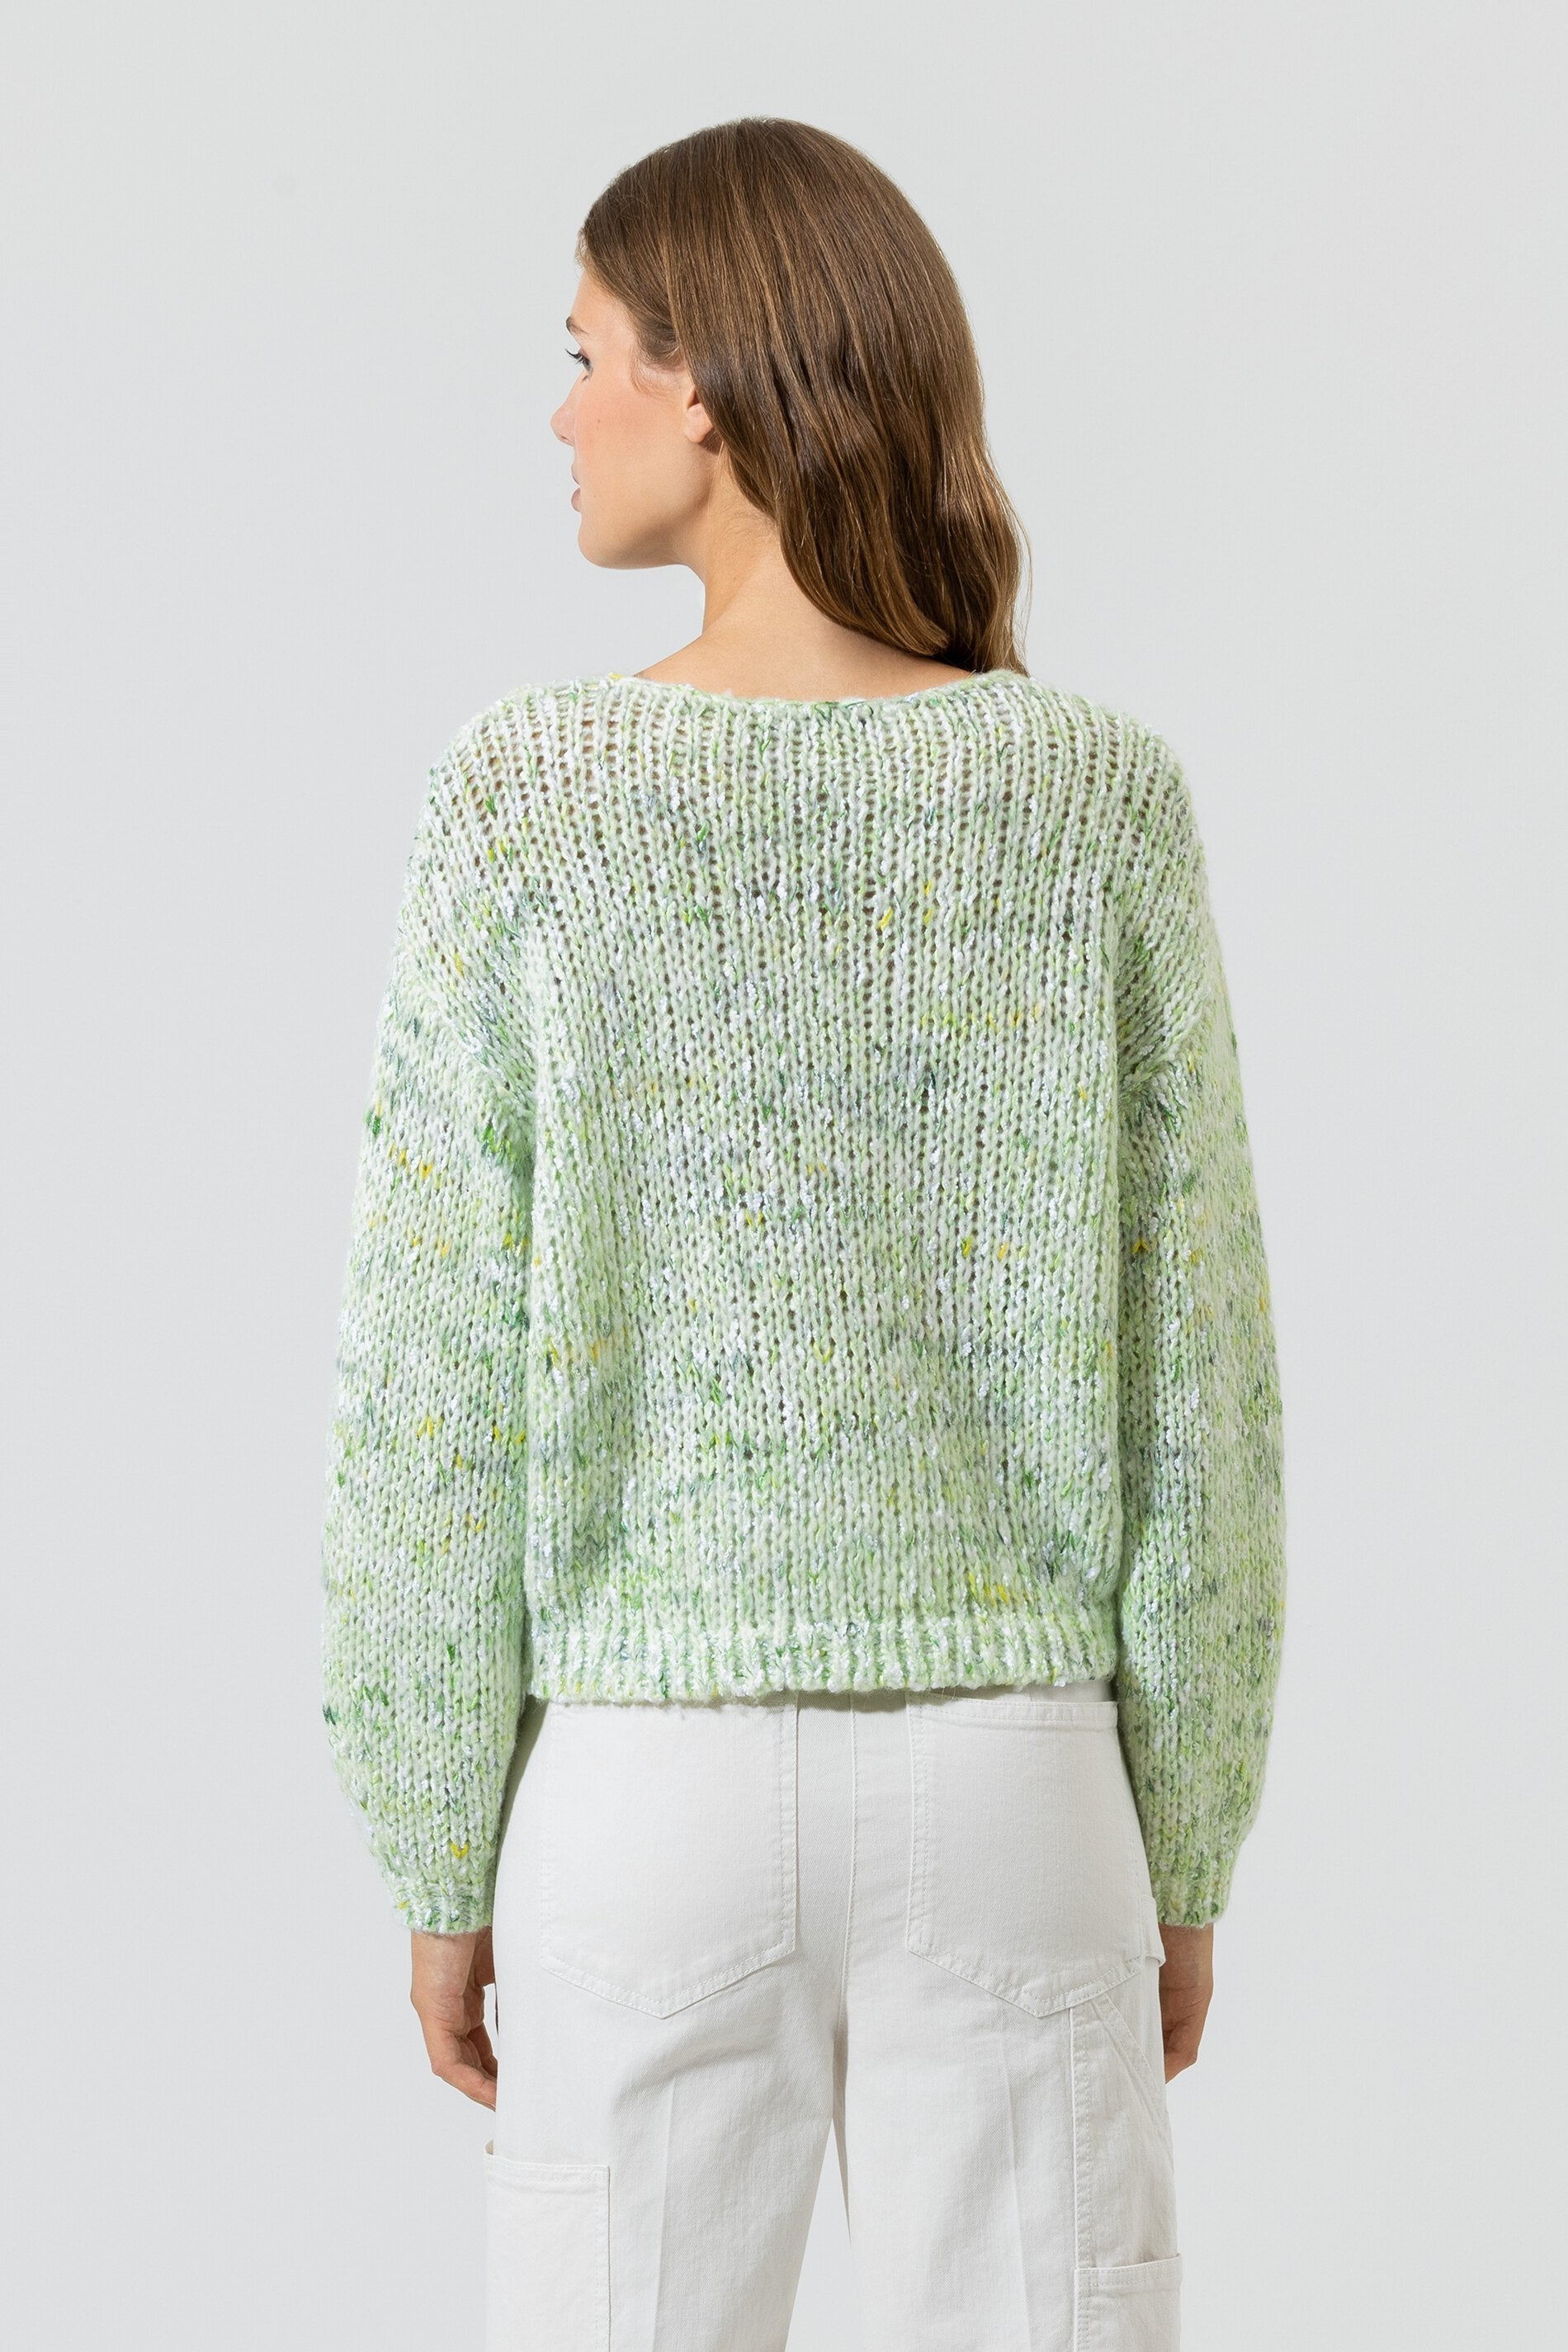 LUISA CERANO-OUTLET-SALE-Rippstrick-Pullover-Strick-by-ARCHIVIST